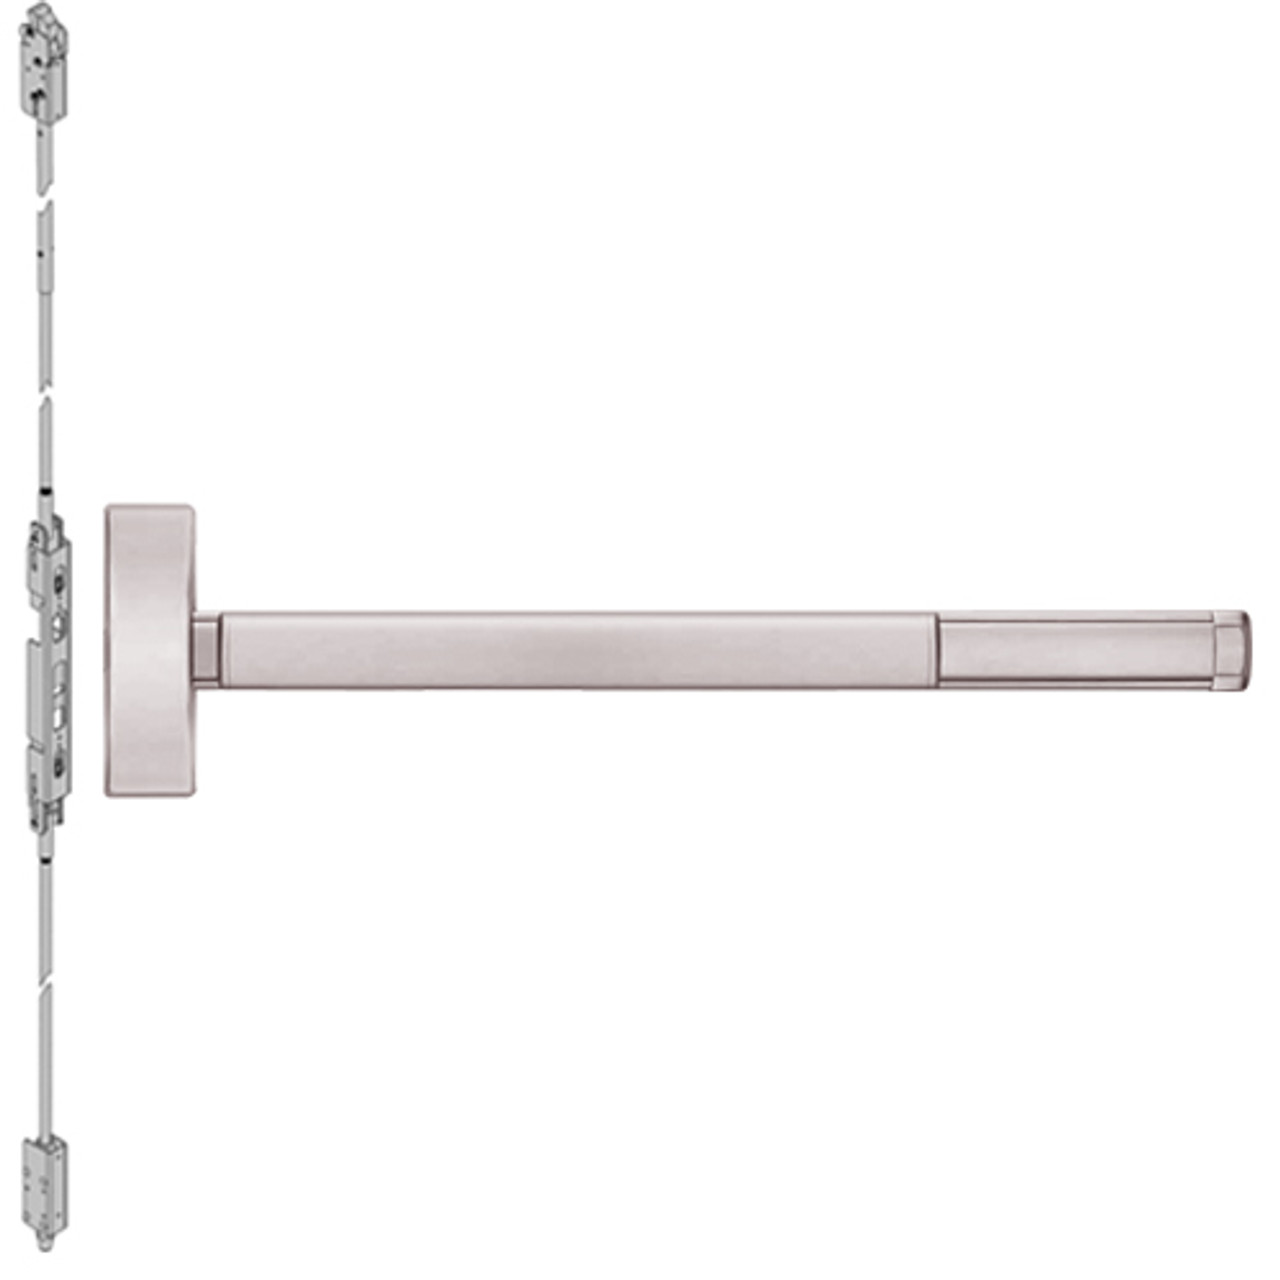 ELRFL2803LBR-628-48 PHI 2800 Series Fire Rated Concealed Vertical Rod Exit Device with Electric Latch Retraction Prepped for Key Retracts Latchbolt in Satin Aluminum Finish